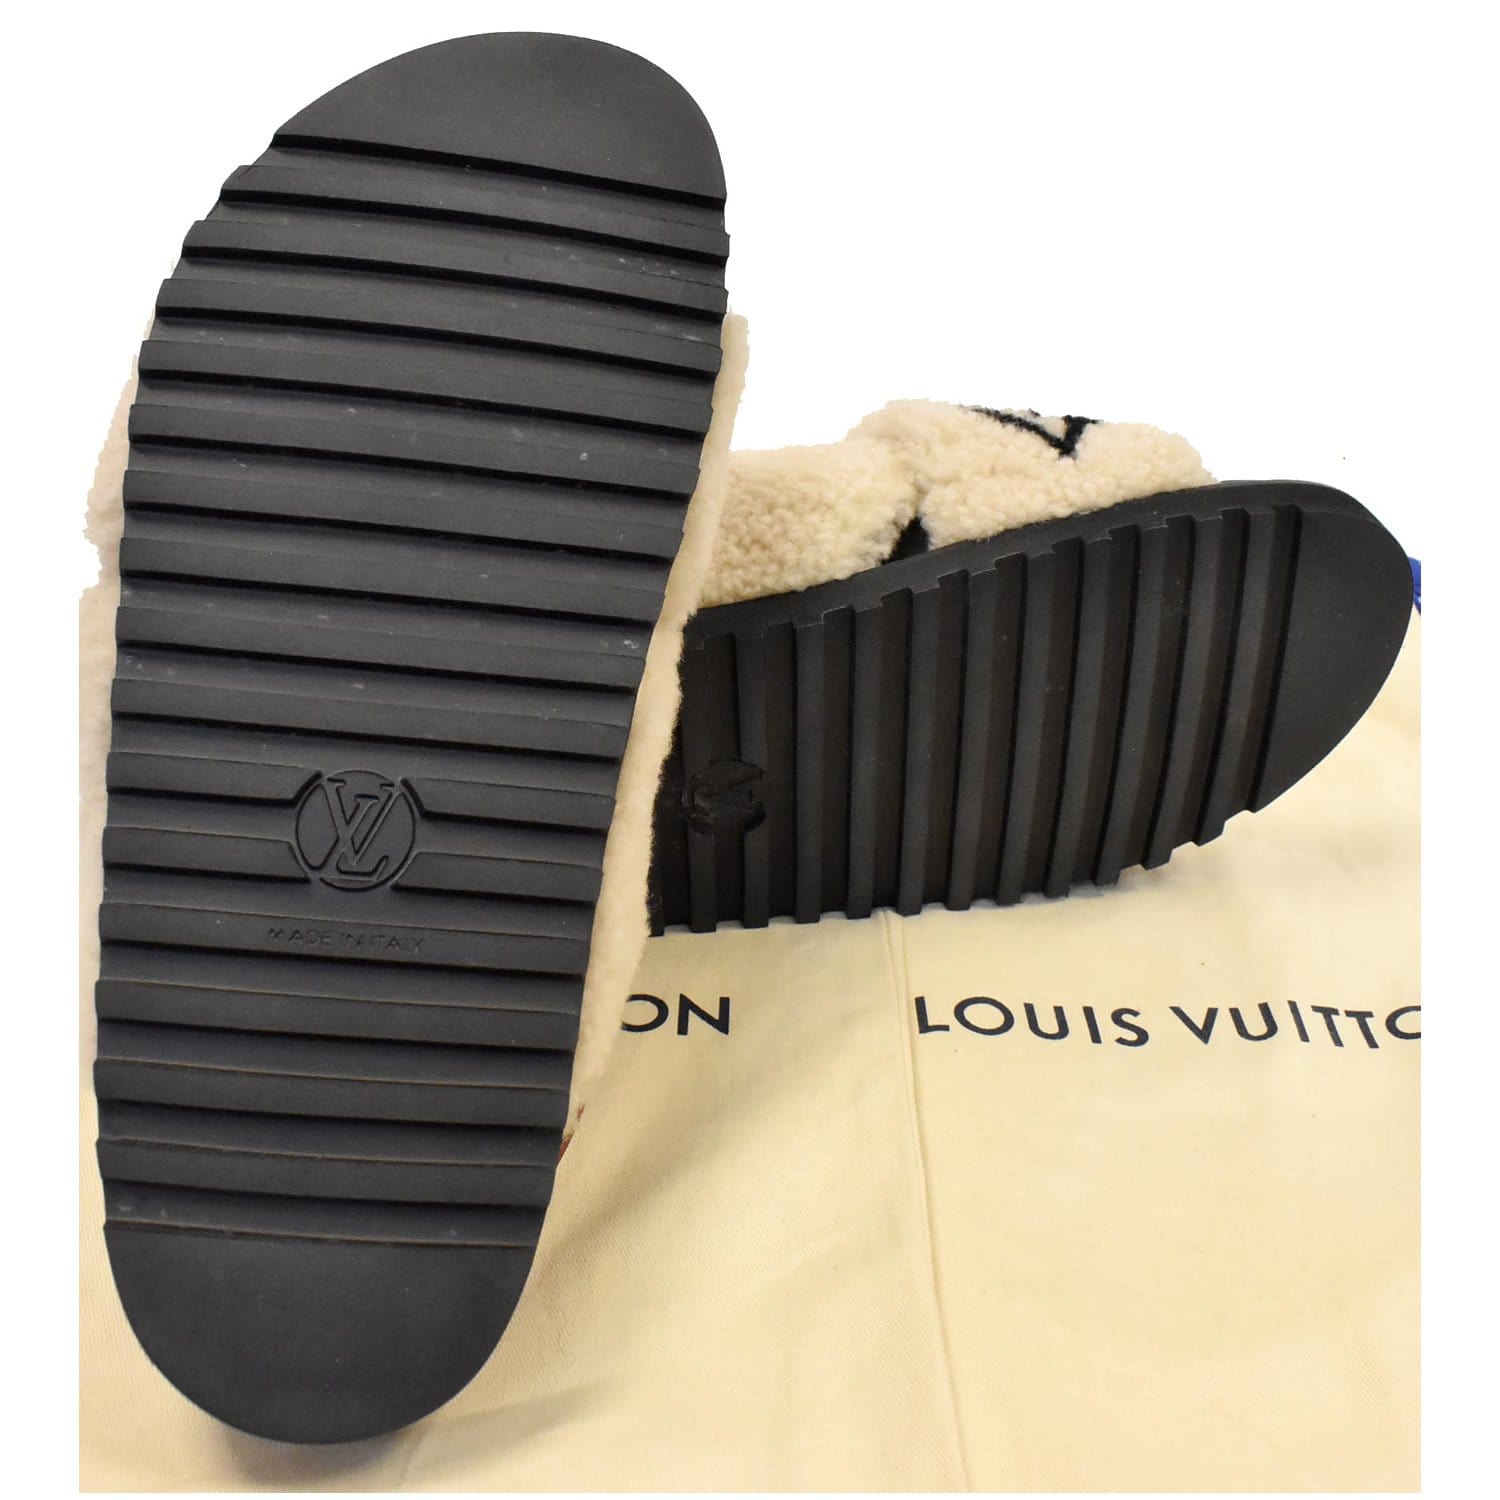 LOUIS VUITTON Paseo Flat Comfort Shearling and Calf Leather Sandal Siz